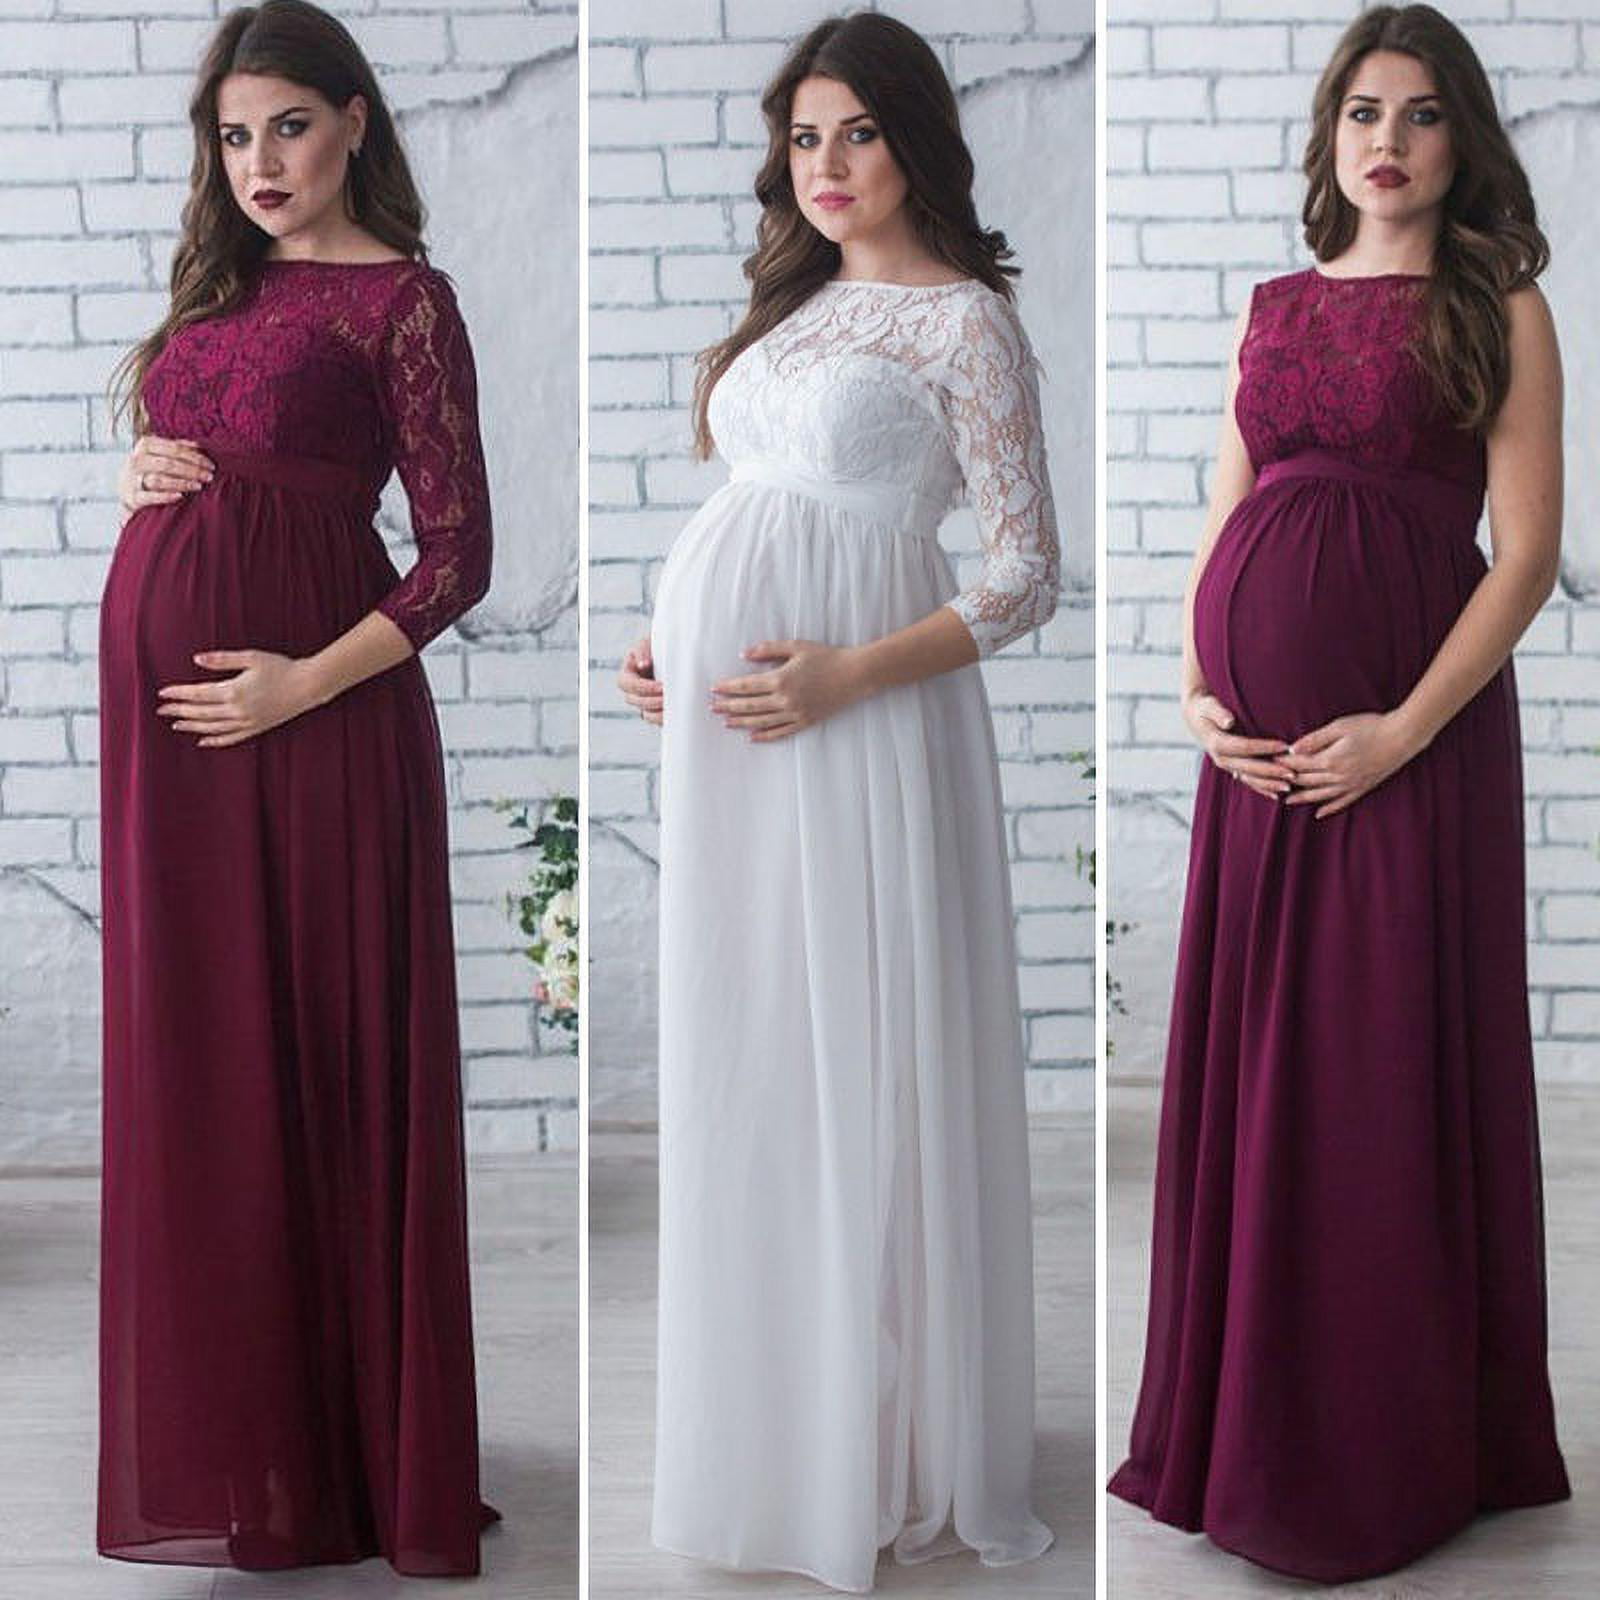 Pregnant Women Sleeveless Maxi Party Dresses Lace Maternity Photography  Clothes | eBay